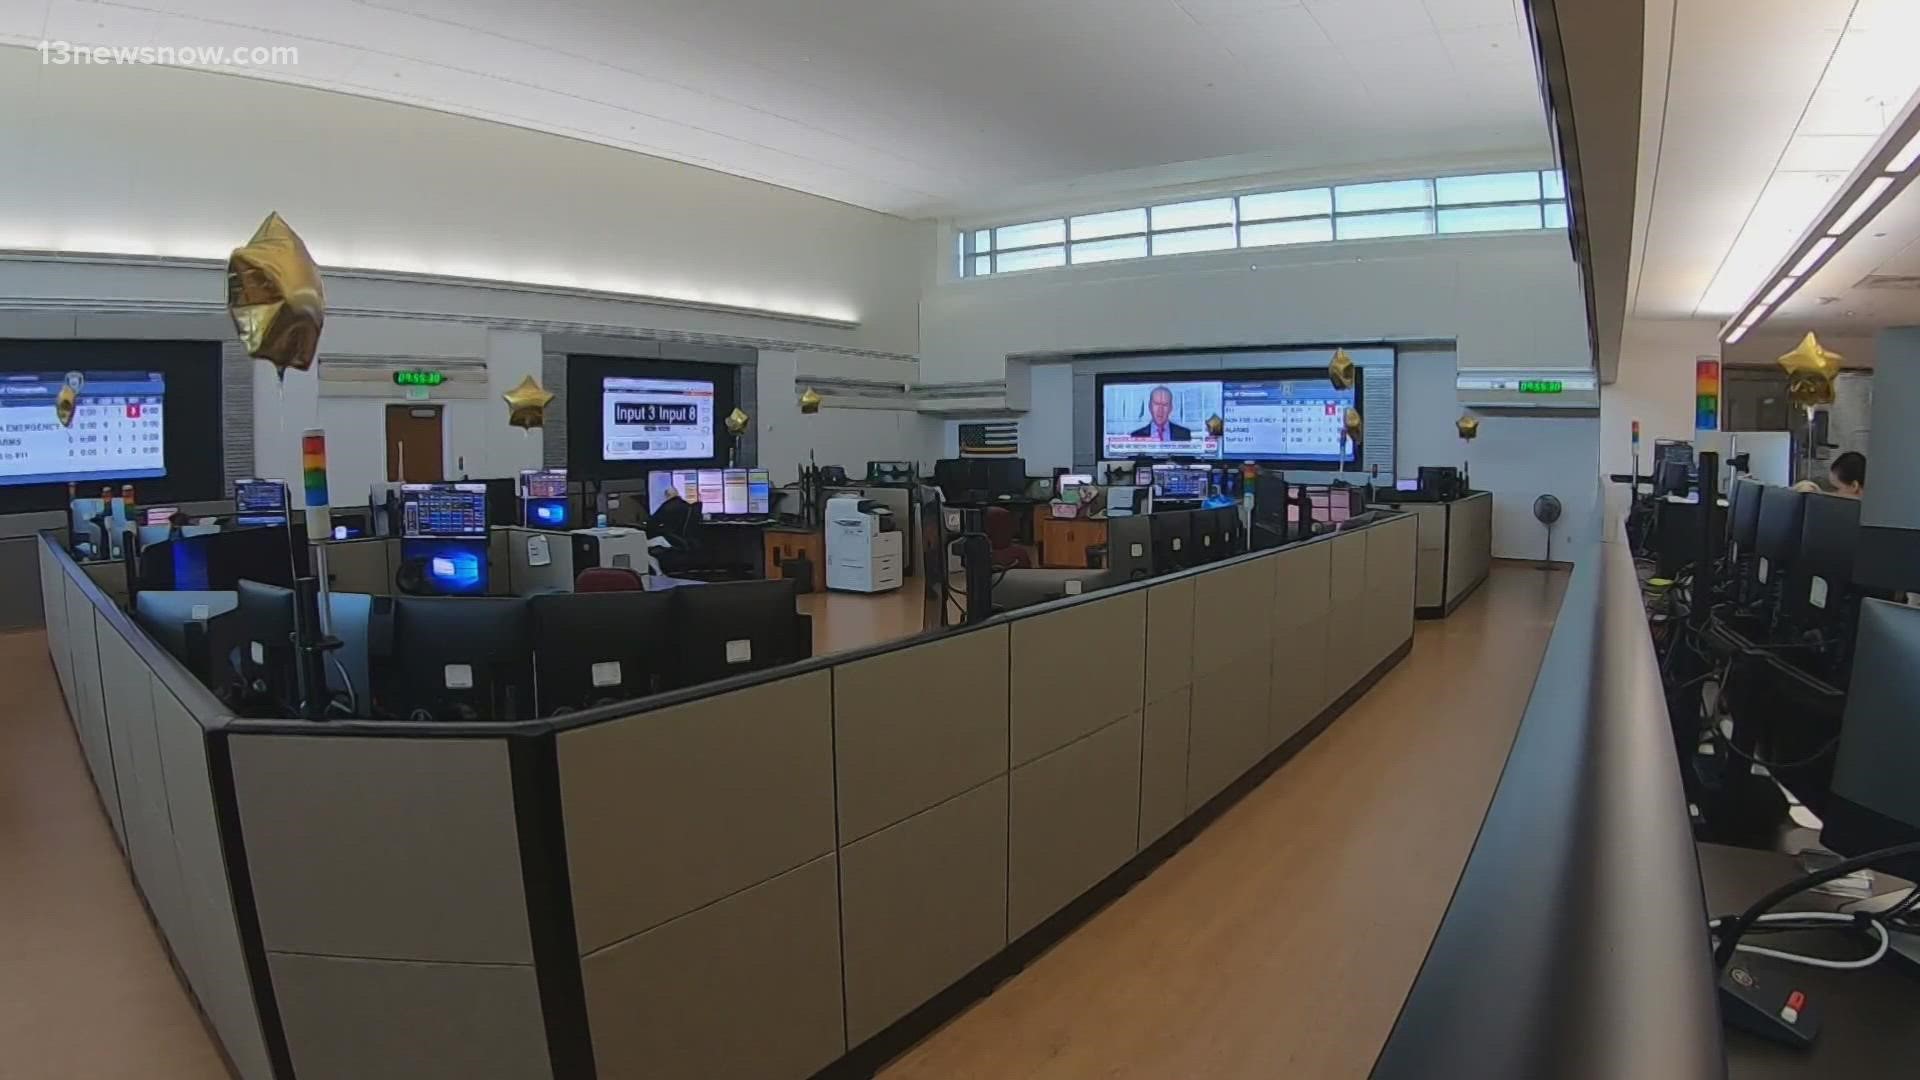 Dispatchers told 13News Now that Chesapeake received more than 100-thousand emergency calls last year alone.